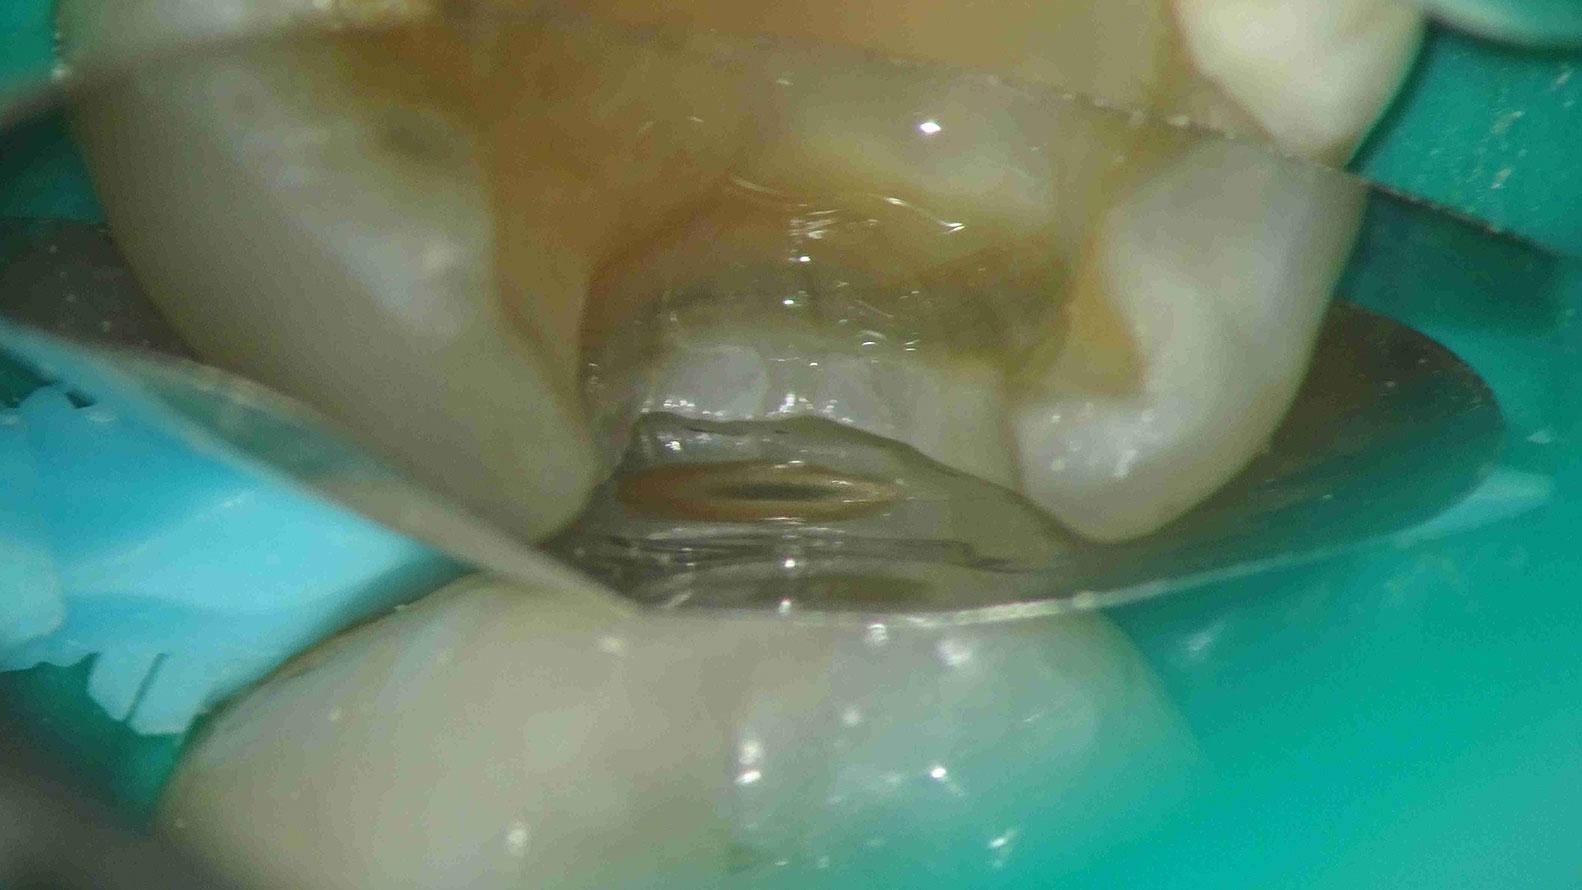 View of a sectional matrix correctly adapted at the gingival margin. 12X magni-fication